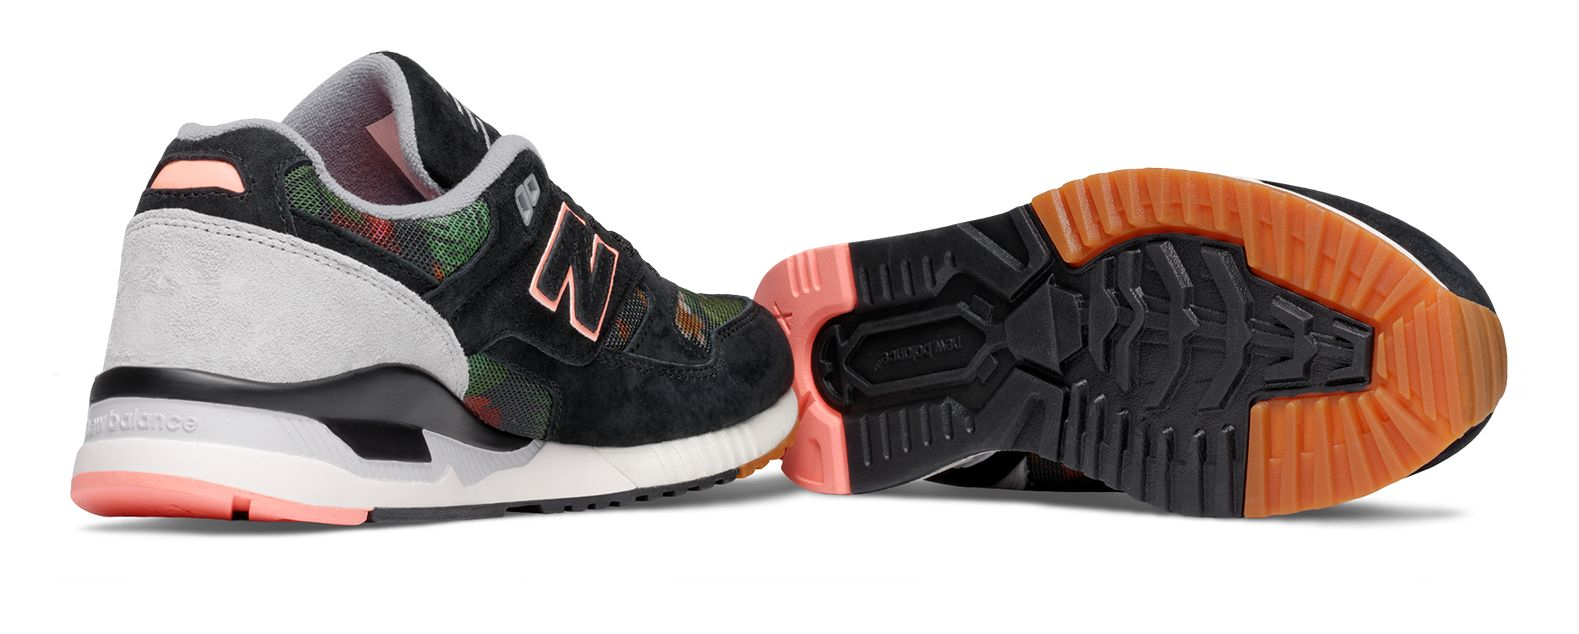 New Balance Rubber 530 Floral Ink in Black - Lyst